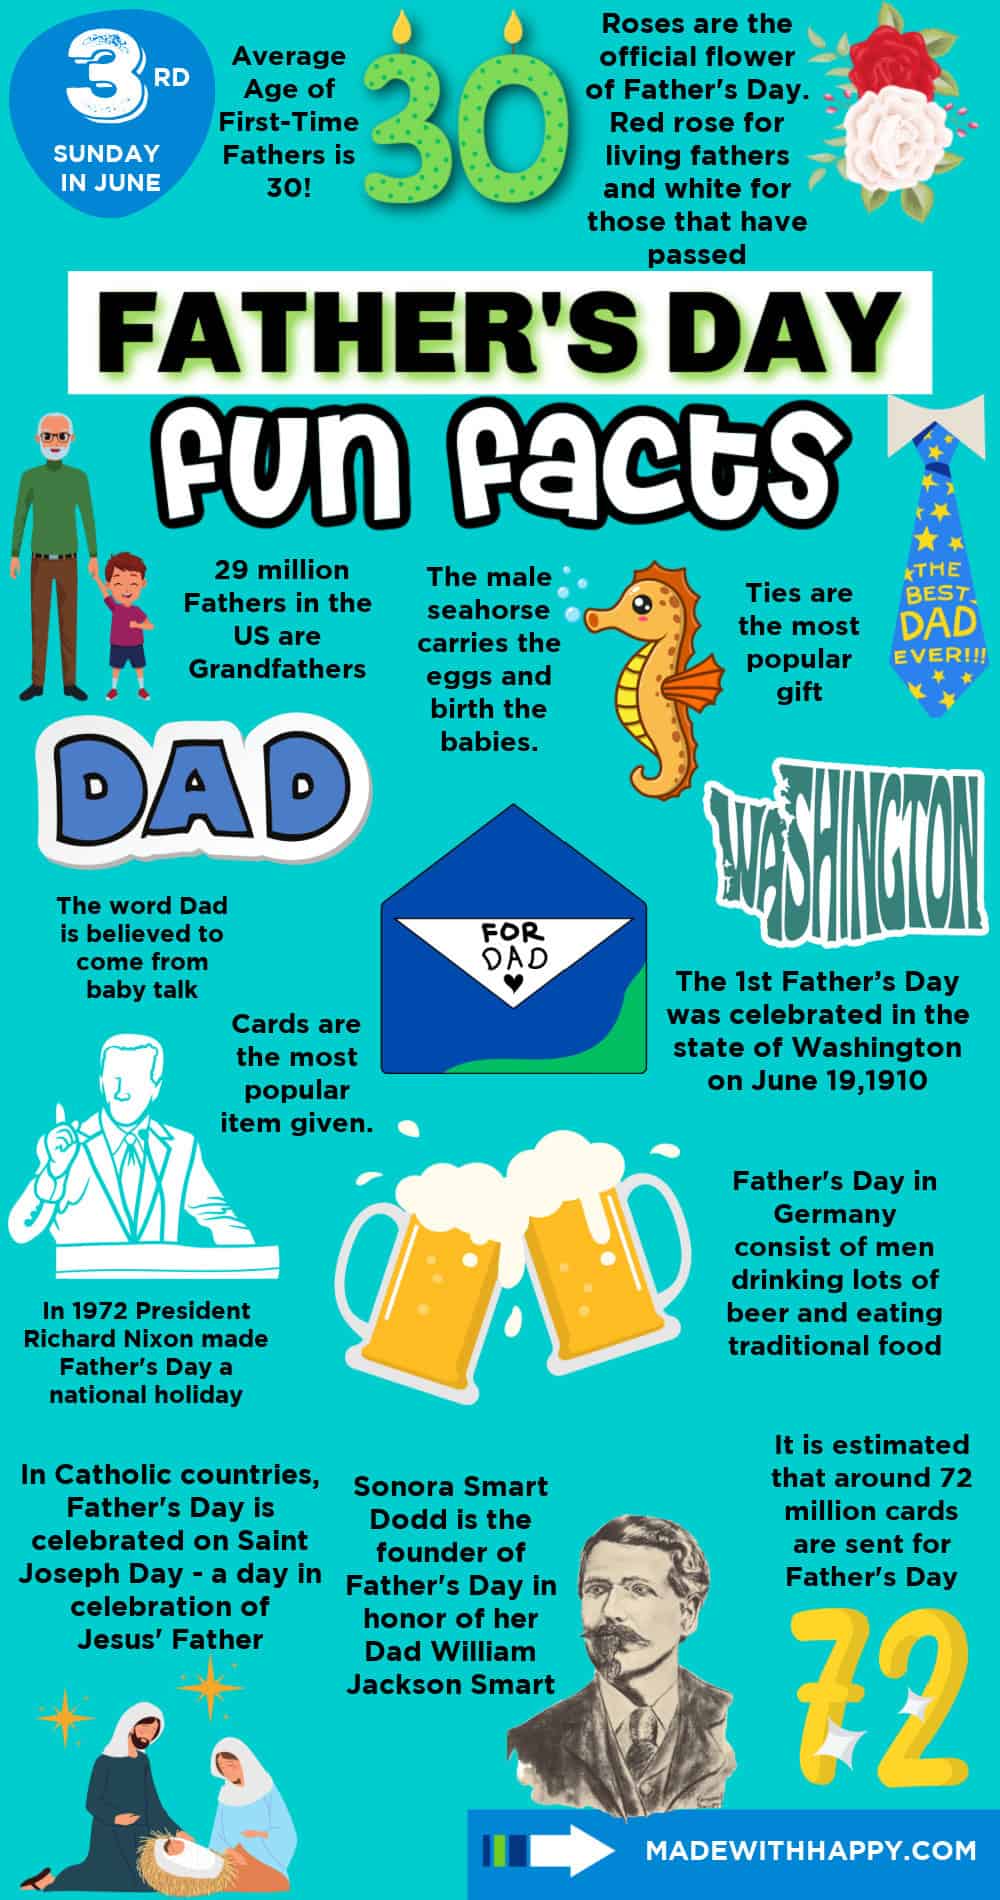 Father's Day Fun Facts - Made with HAPPY